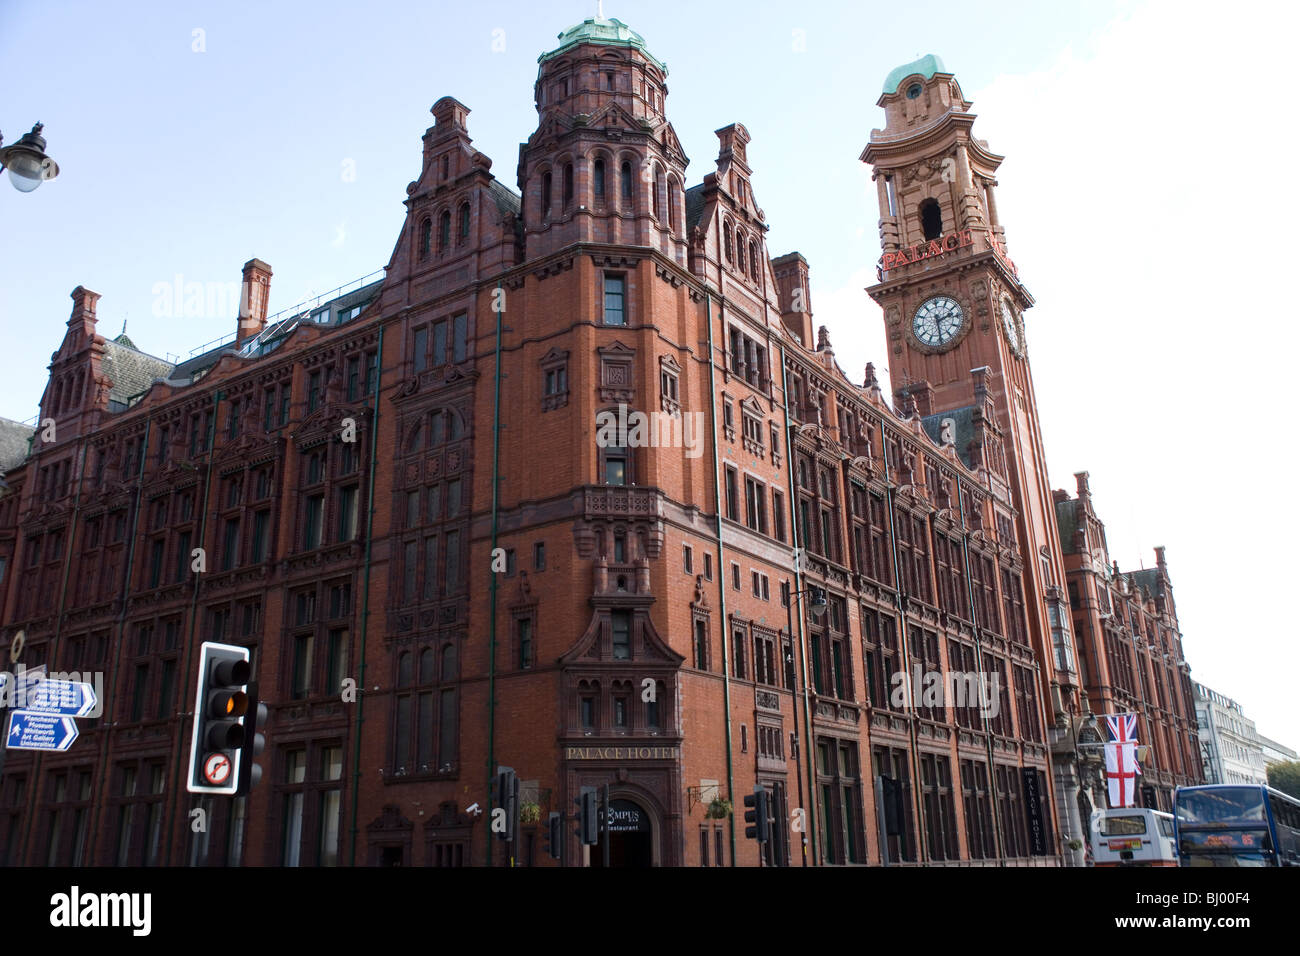 Palace Hotel on Oxford Street Manchester Stock Photo